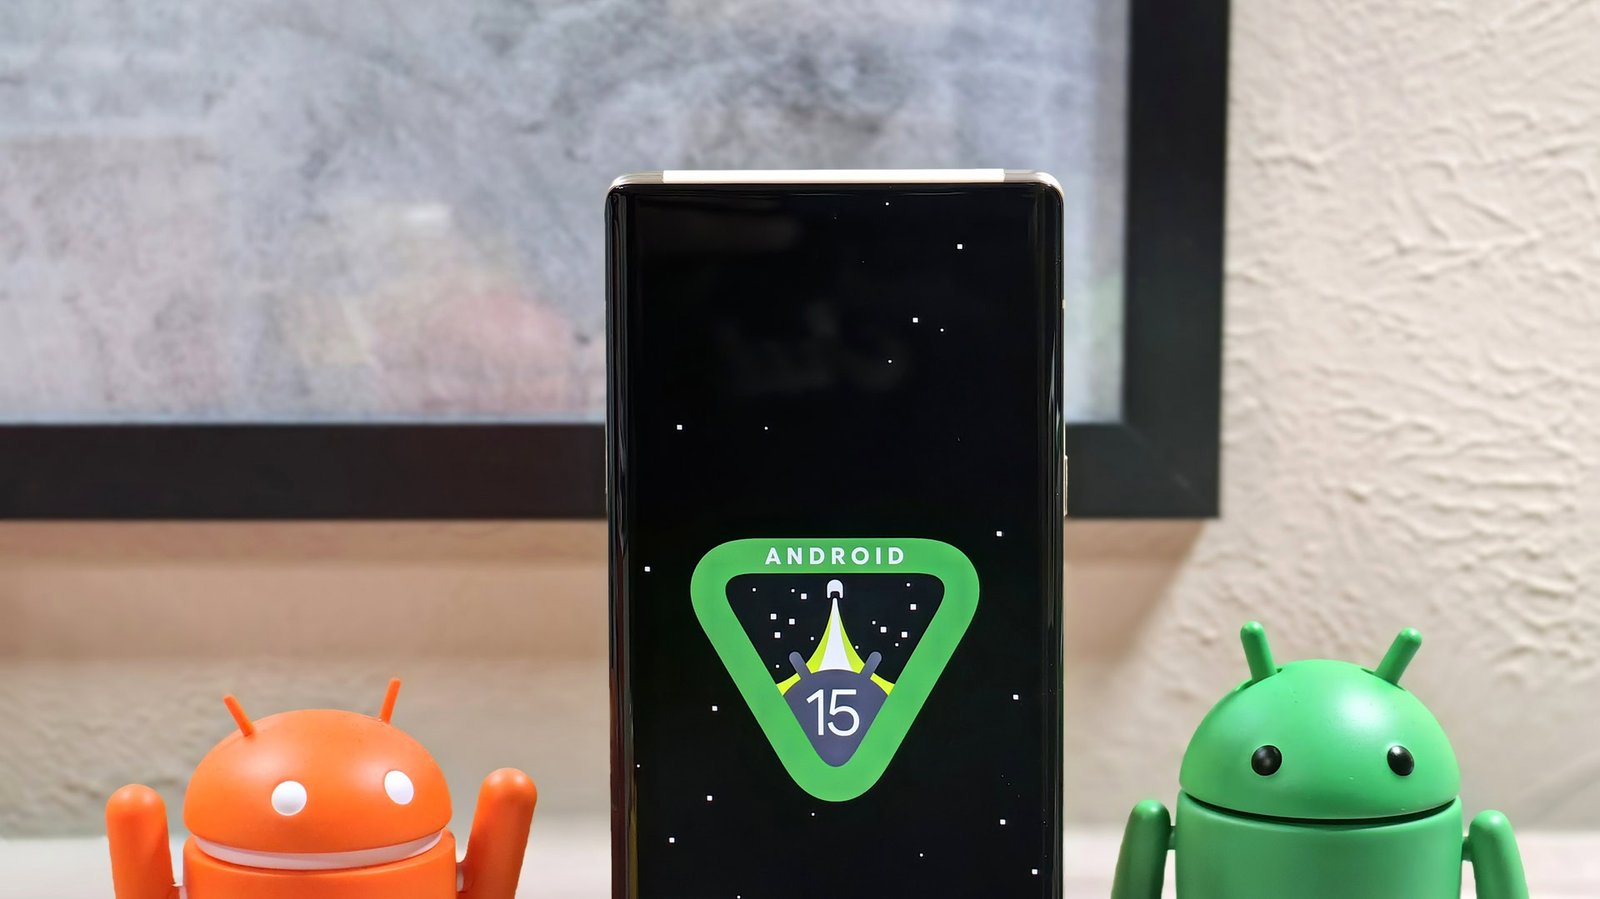 Here’s even more info on four of the most exciting new Android 15 features